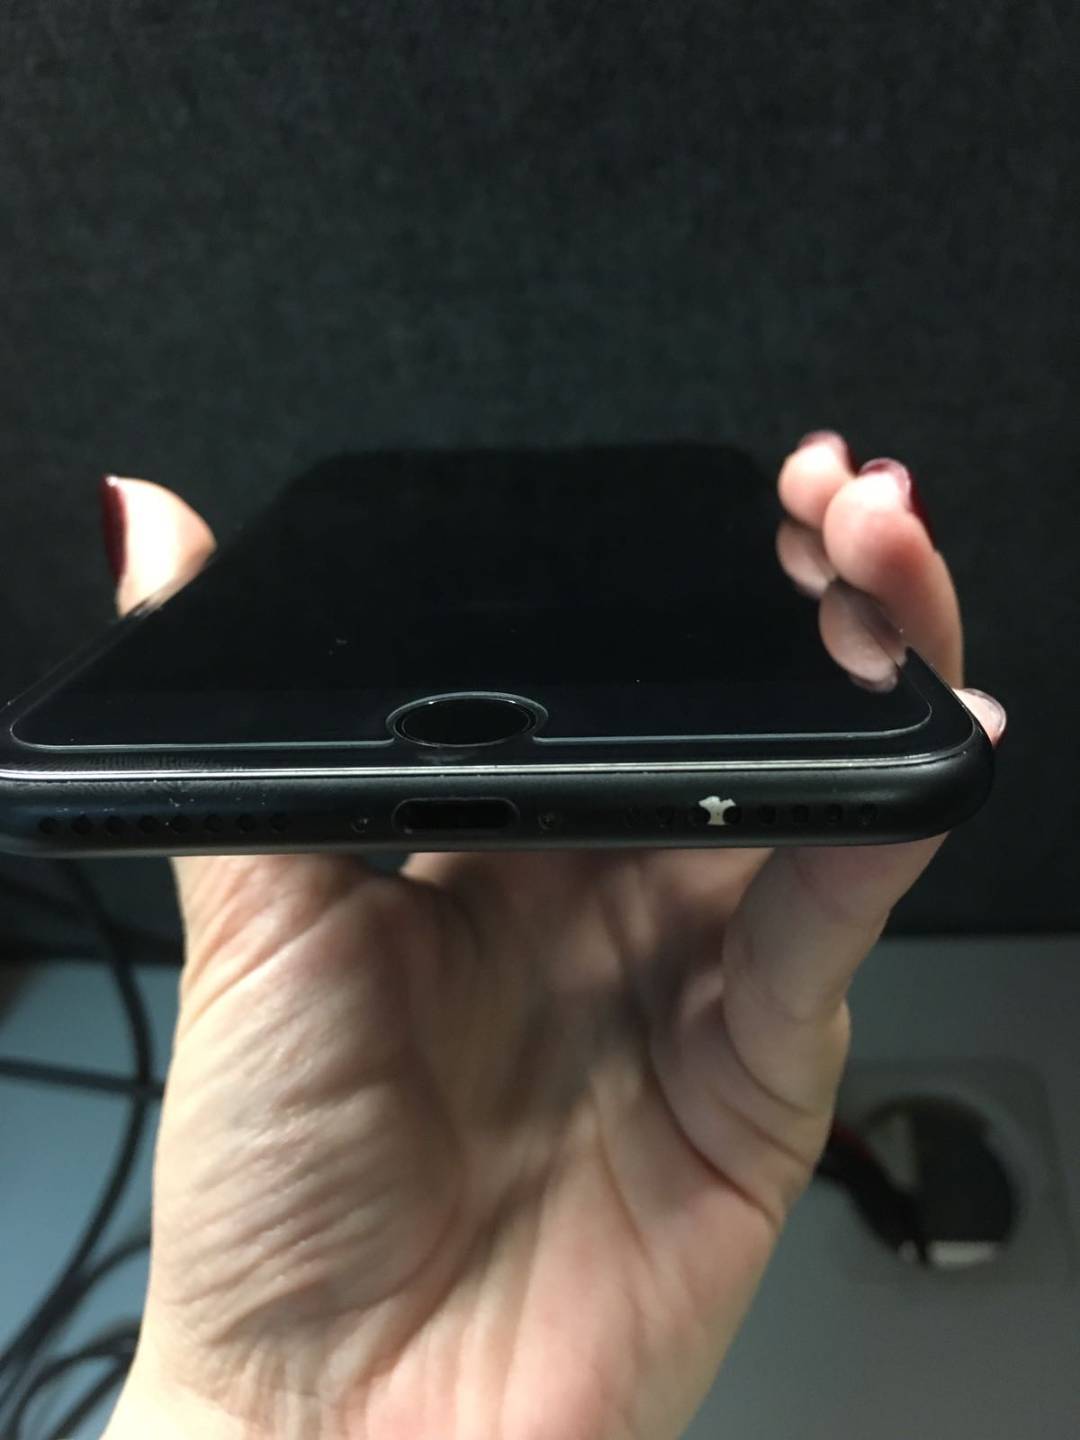 Matte Black iPhone 7 Owners Complain of Chipped Paint [Photos]